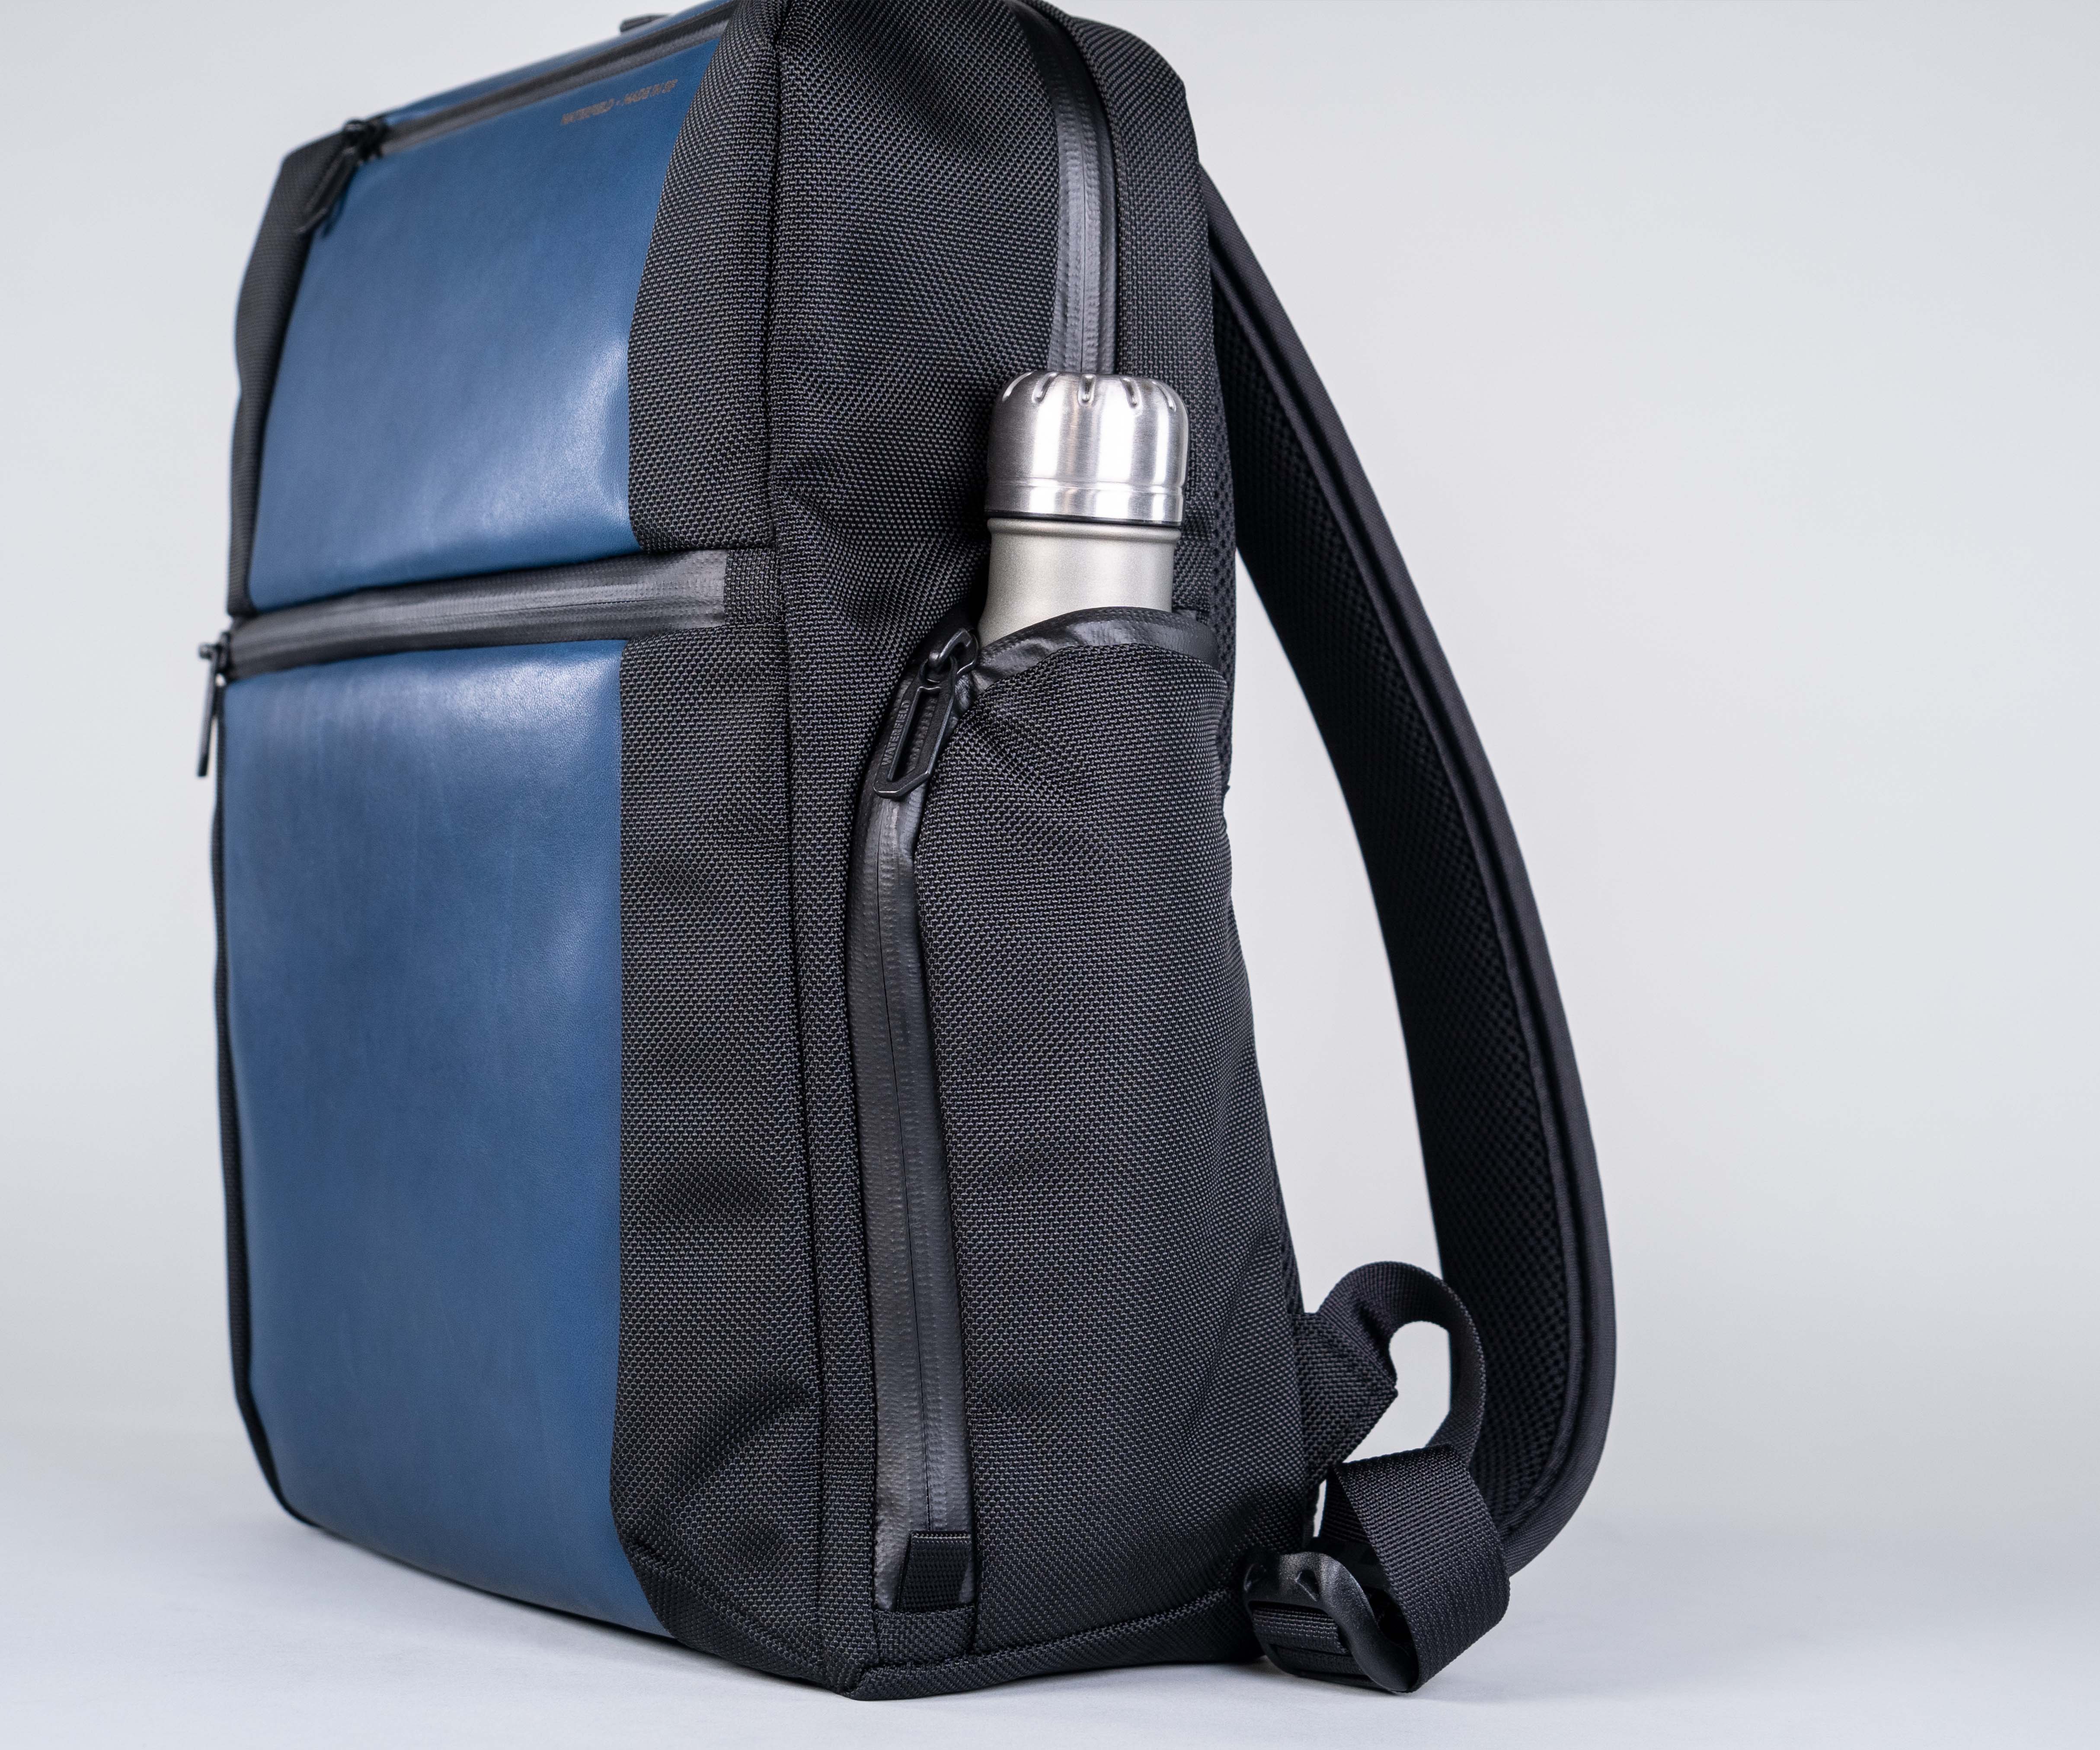 Zippered water bottle pocket holds various sizes and uses interior space to keep bag compact.